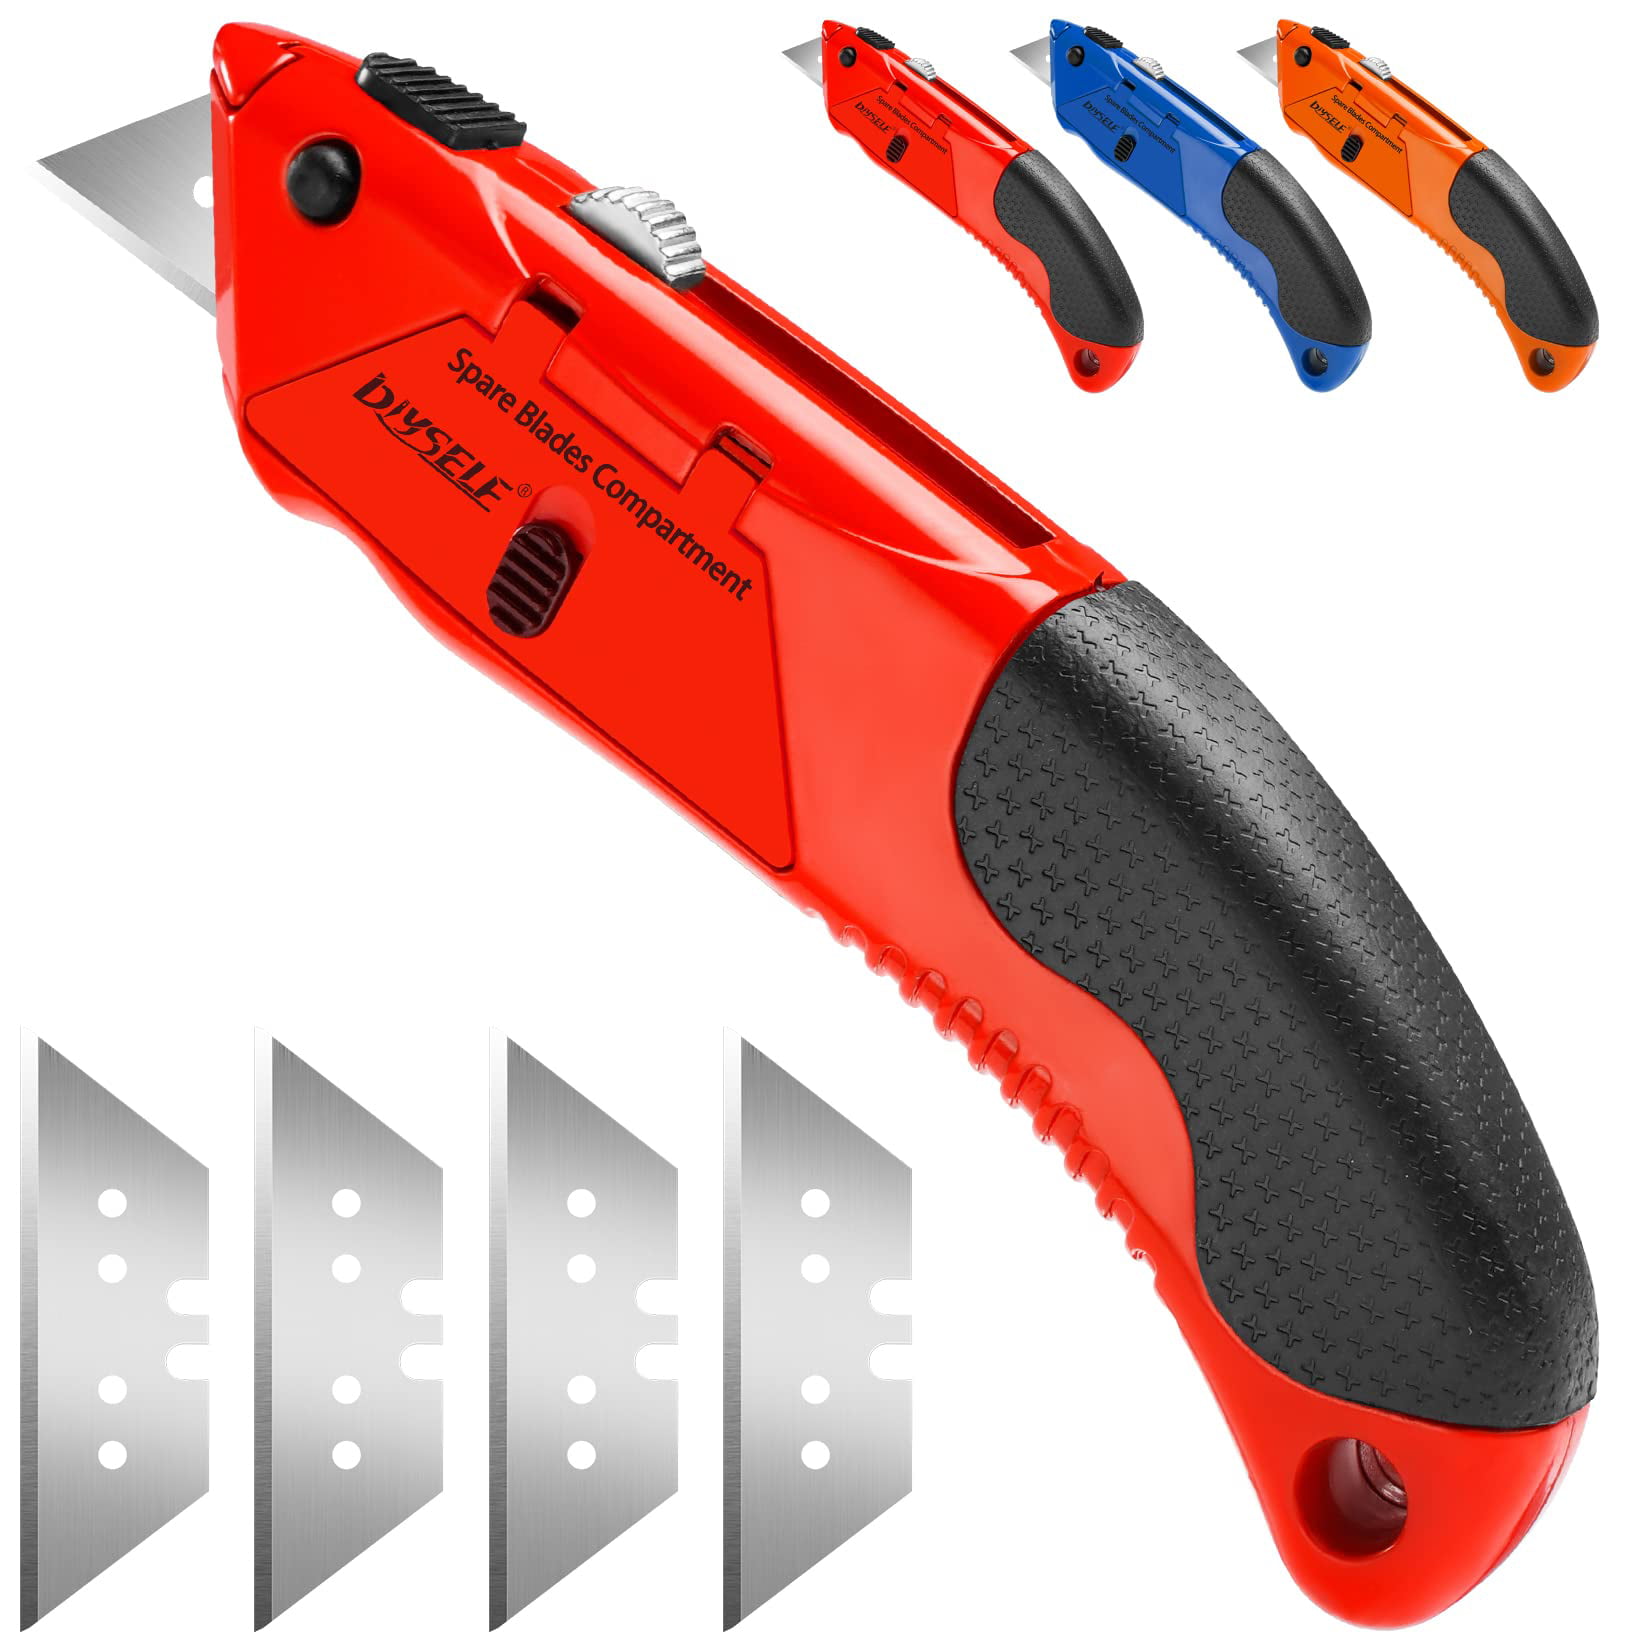 DIYSELF 2 Pack Utility Knife, Folding Retractable Box Cutter Heavy Duty ,  Quick Change Blades Mechanism, Box Knife for Cartons, Cardboard and Boxes,  Extra 10-piece Blade Included price in UAE,  UAE